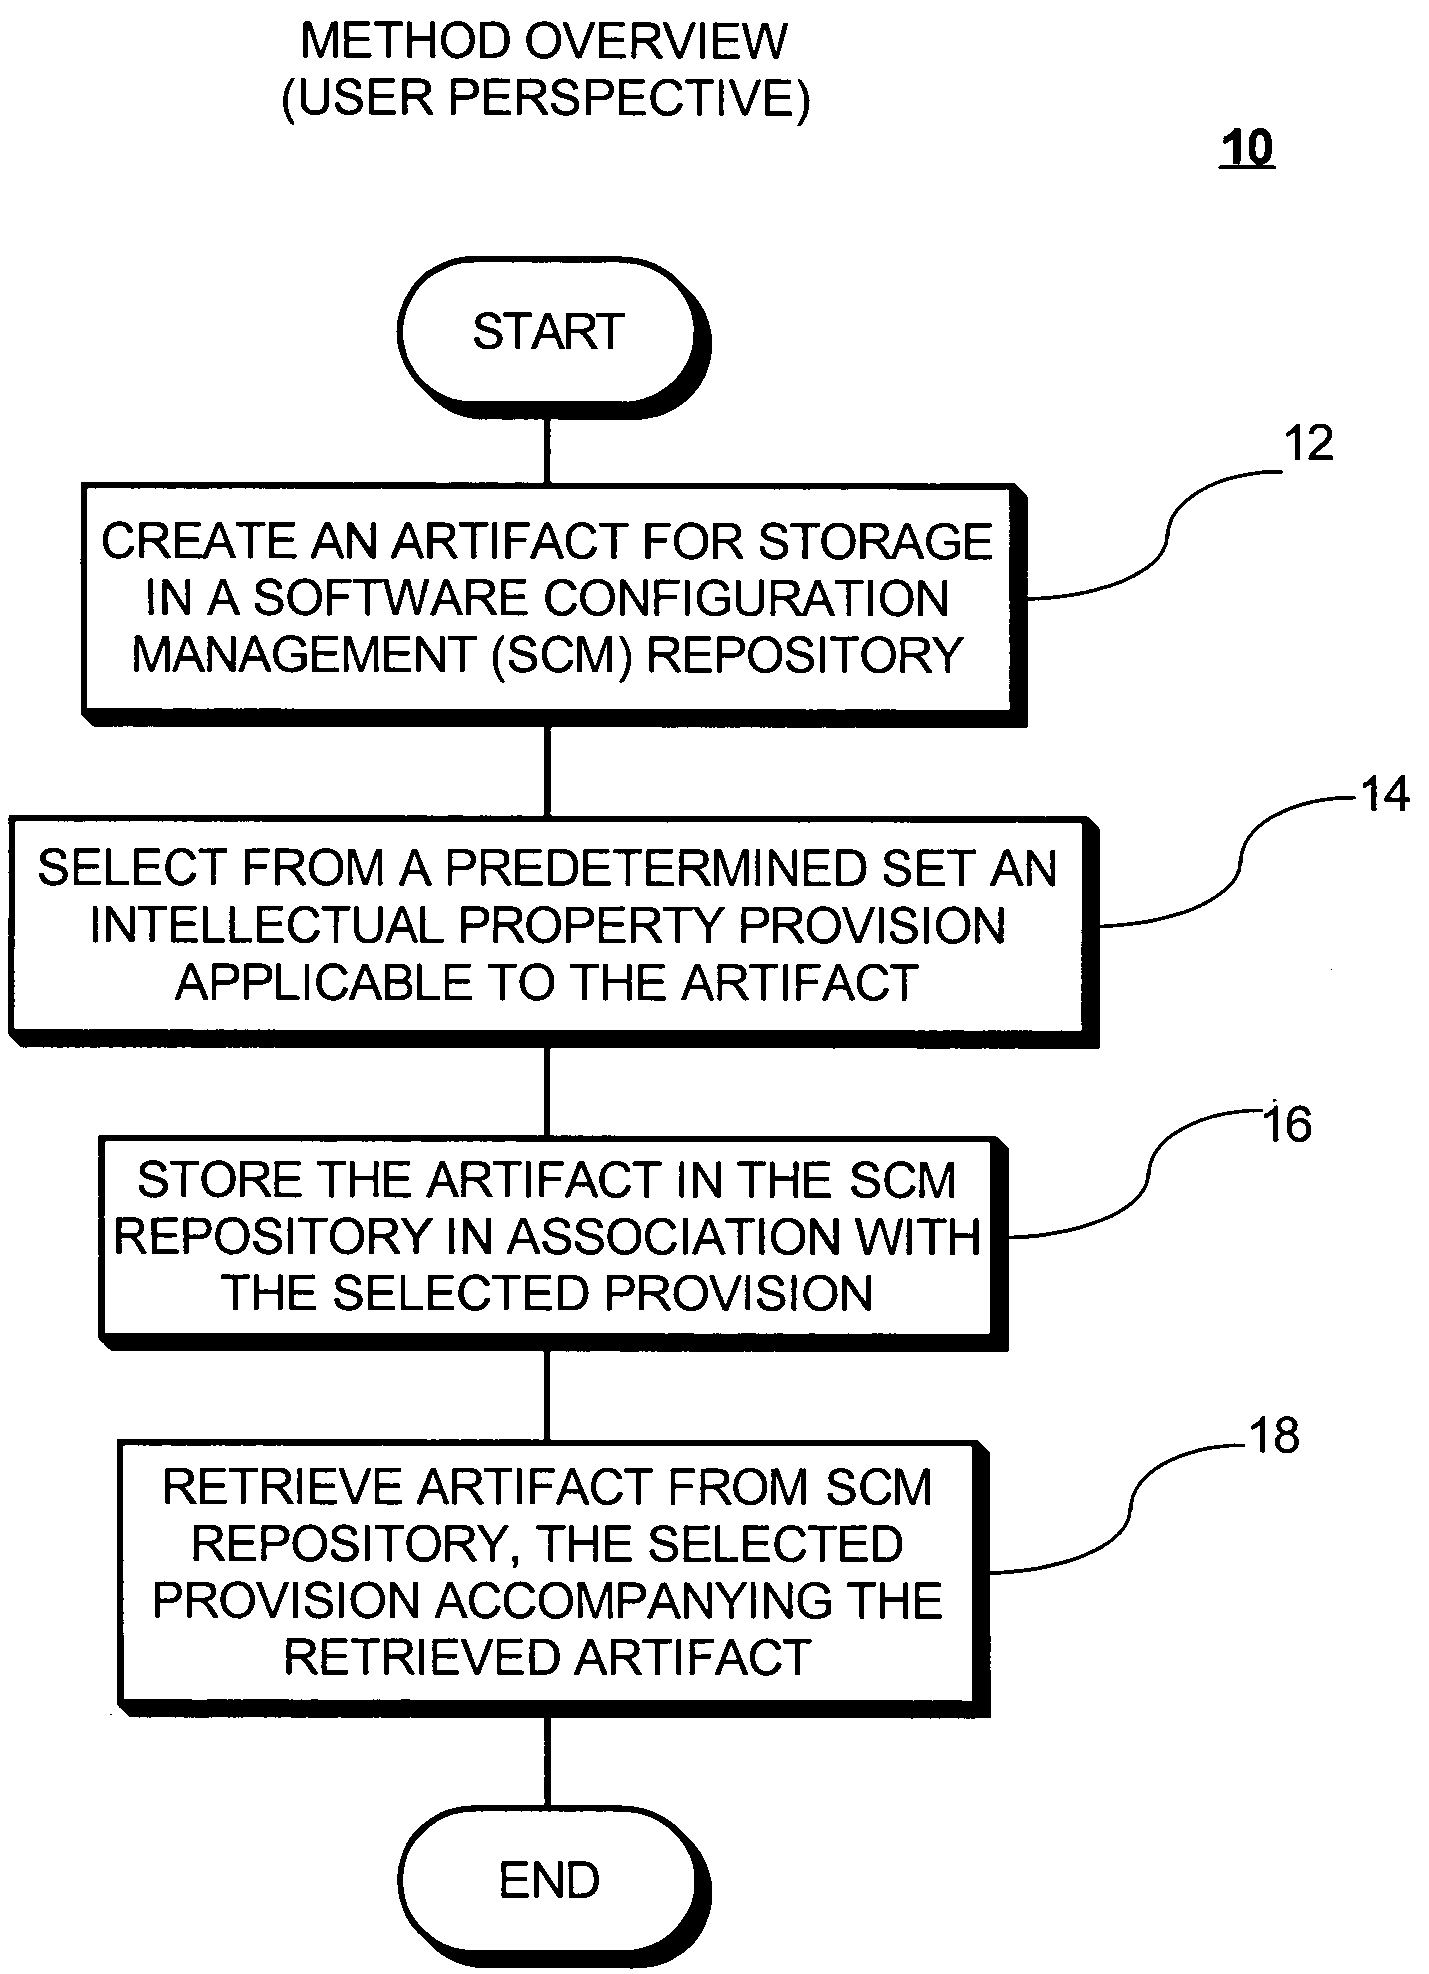 Method and system for managing intellectual property aspects of software code